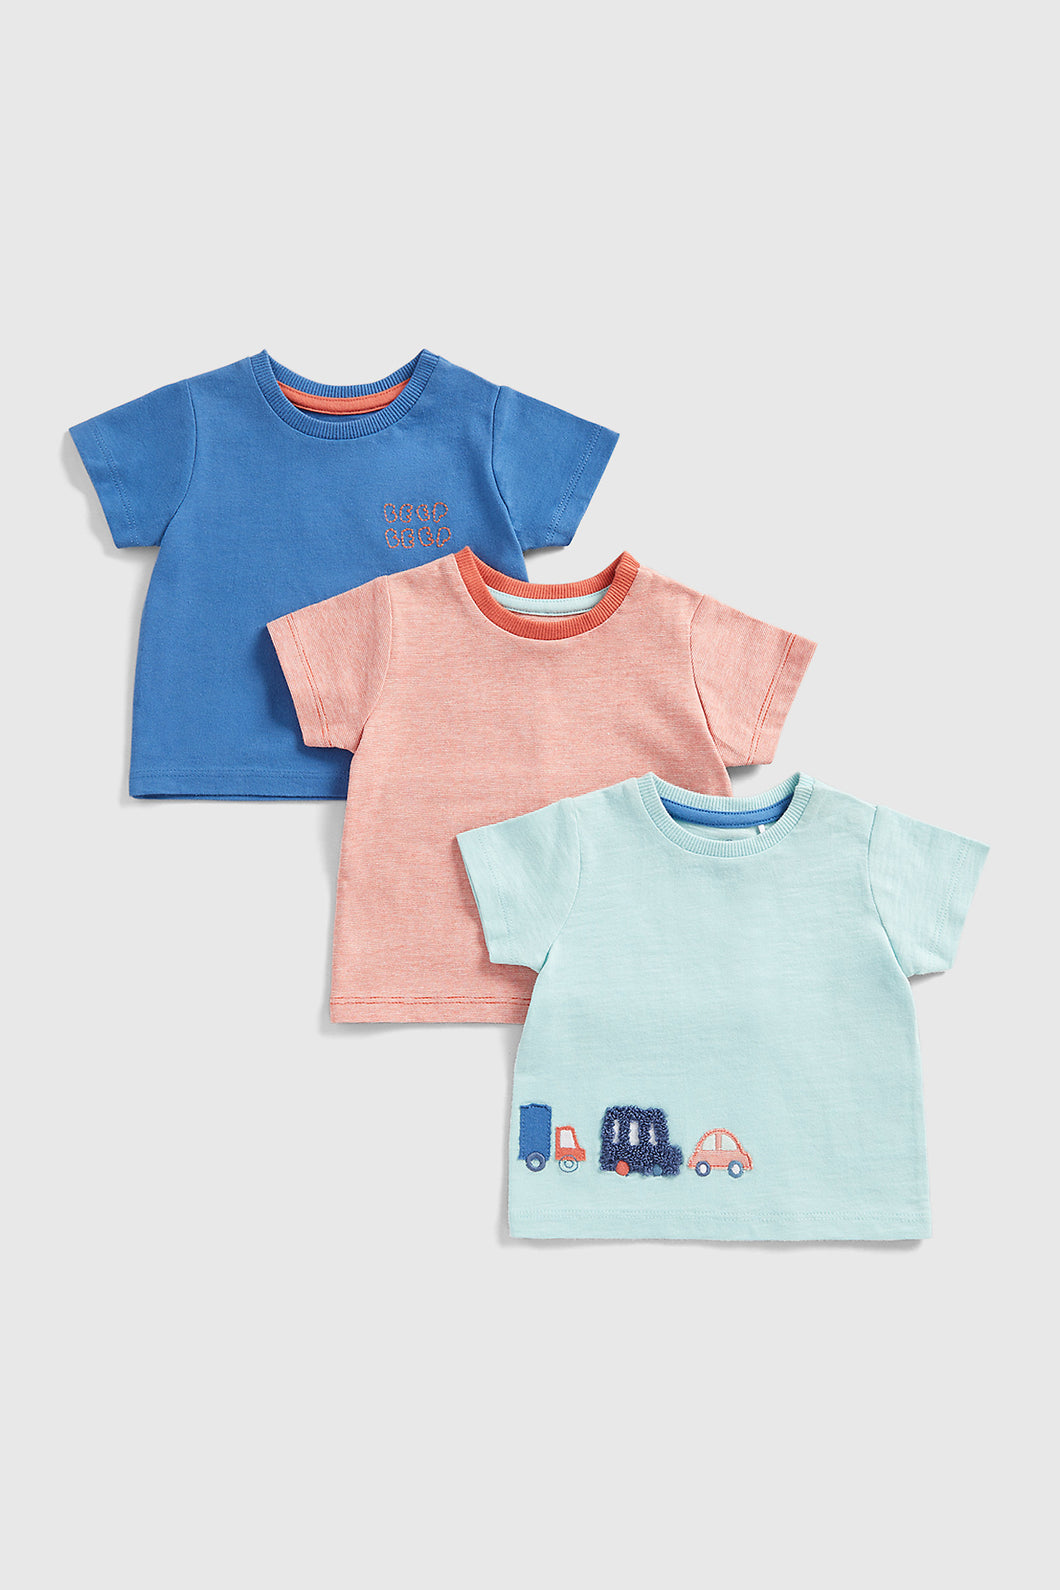 Mothercare Vehicles T-Shirts - 3 Pack